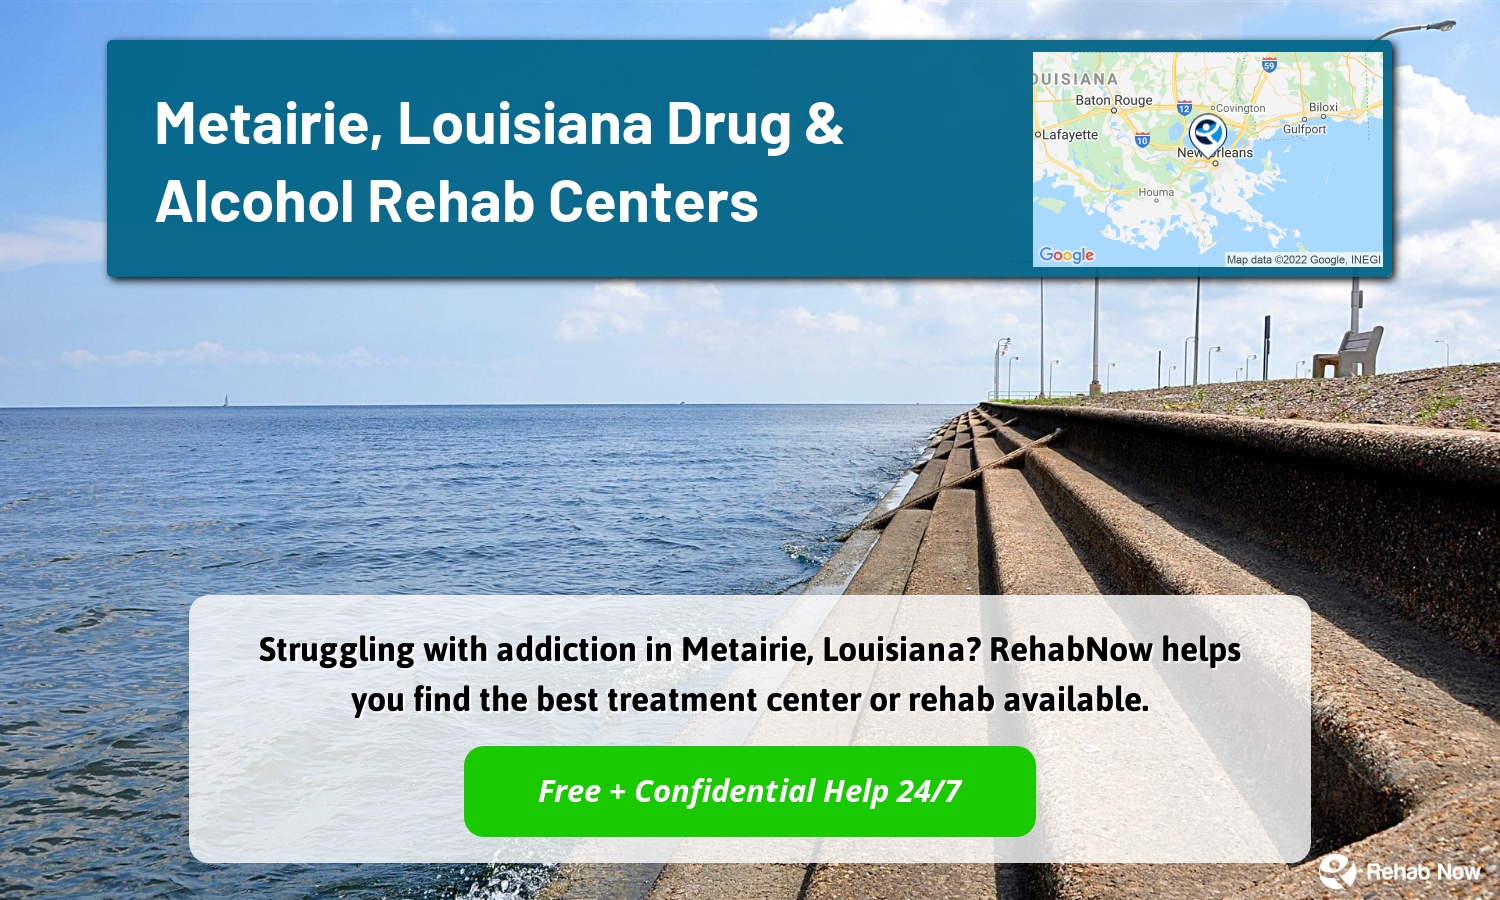 Struggling with addiction in Metairie, Louisiana? RehabNow helps you find the best treatment center or rehab available.